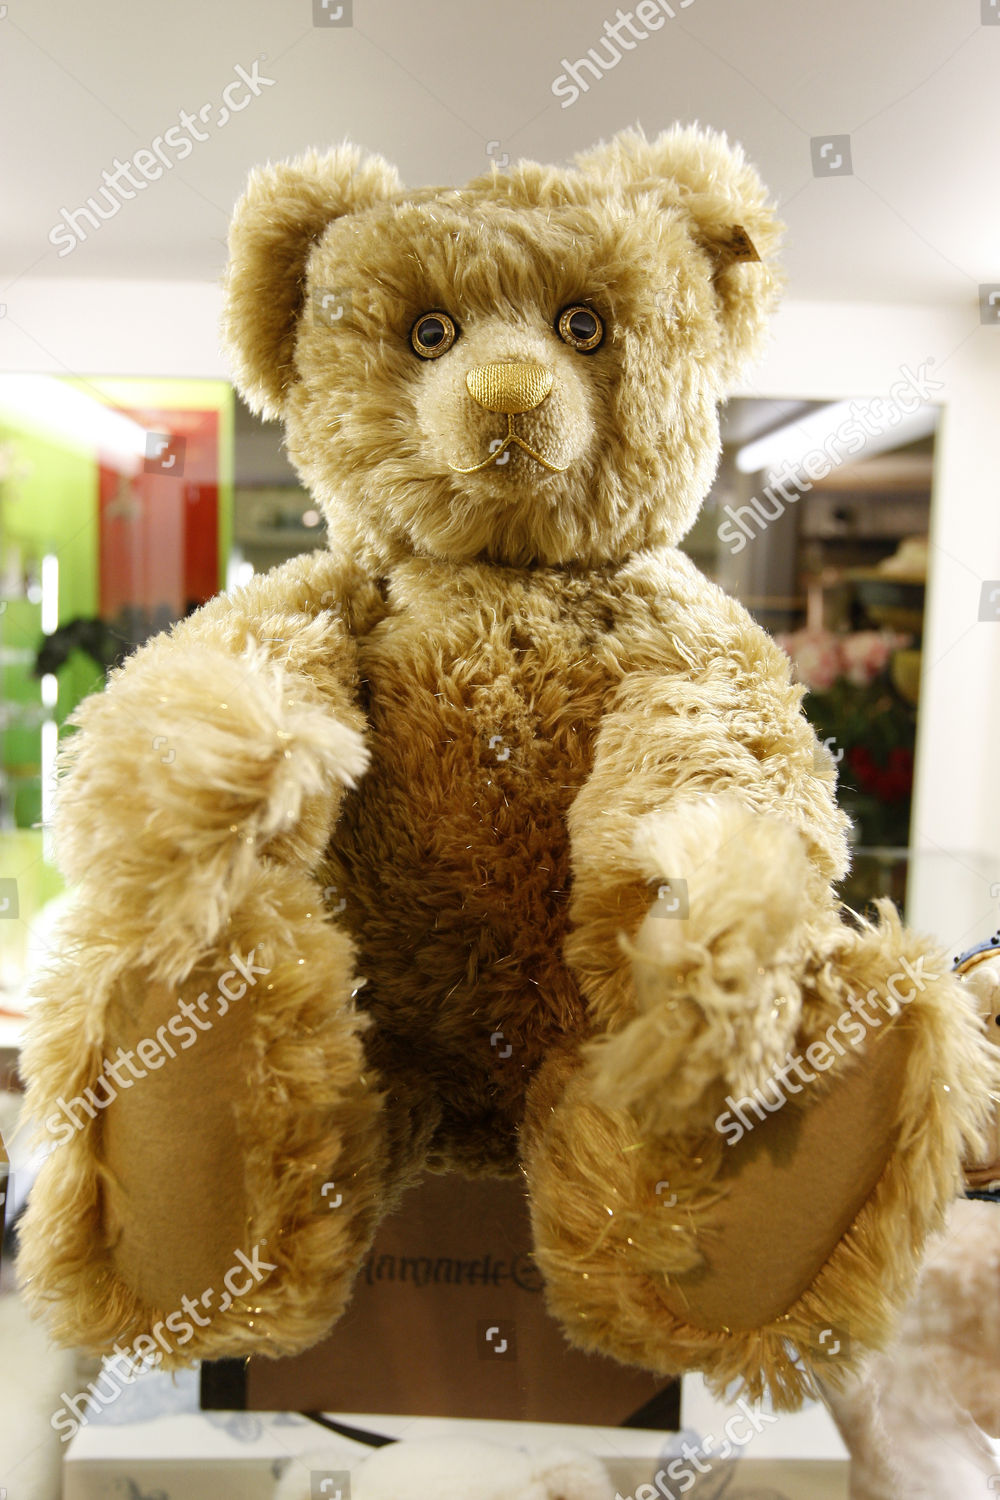 world's most expensive teddy bear